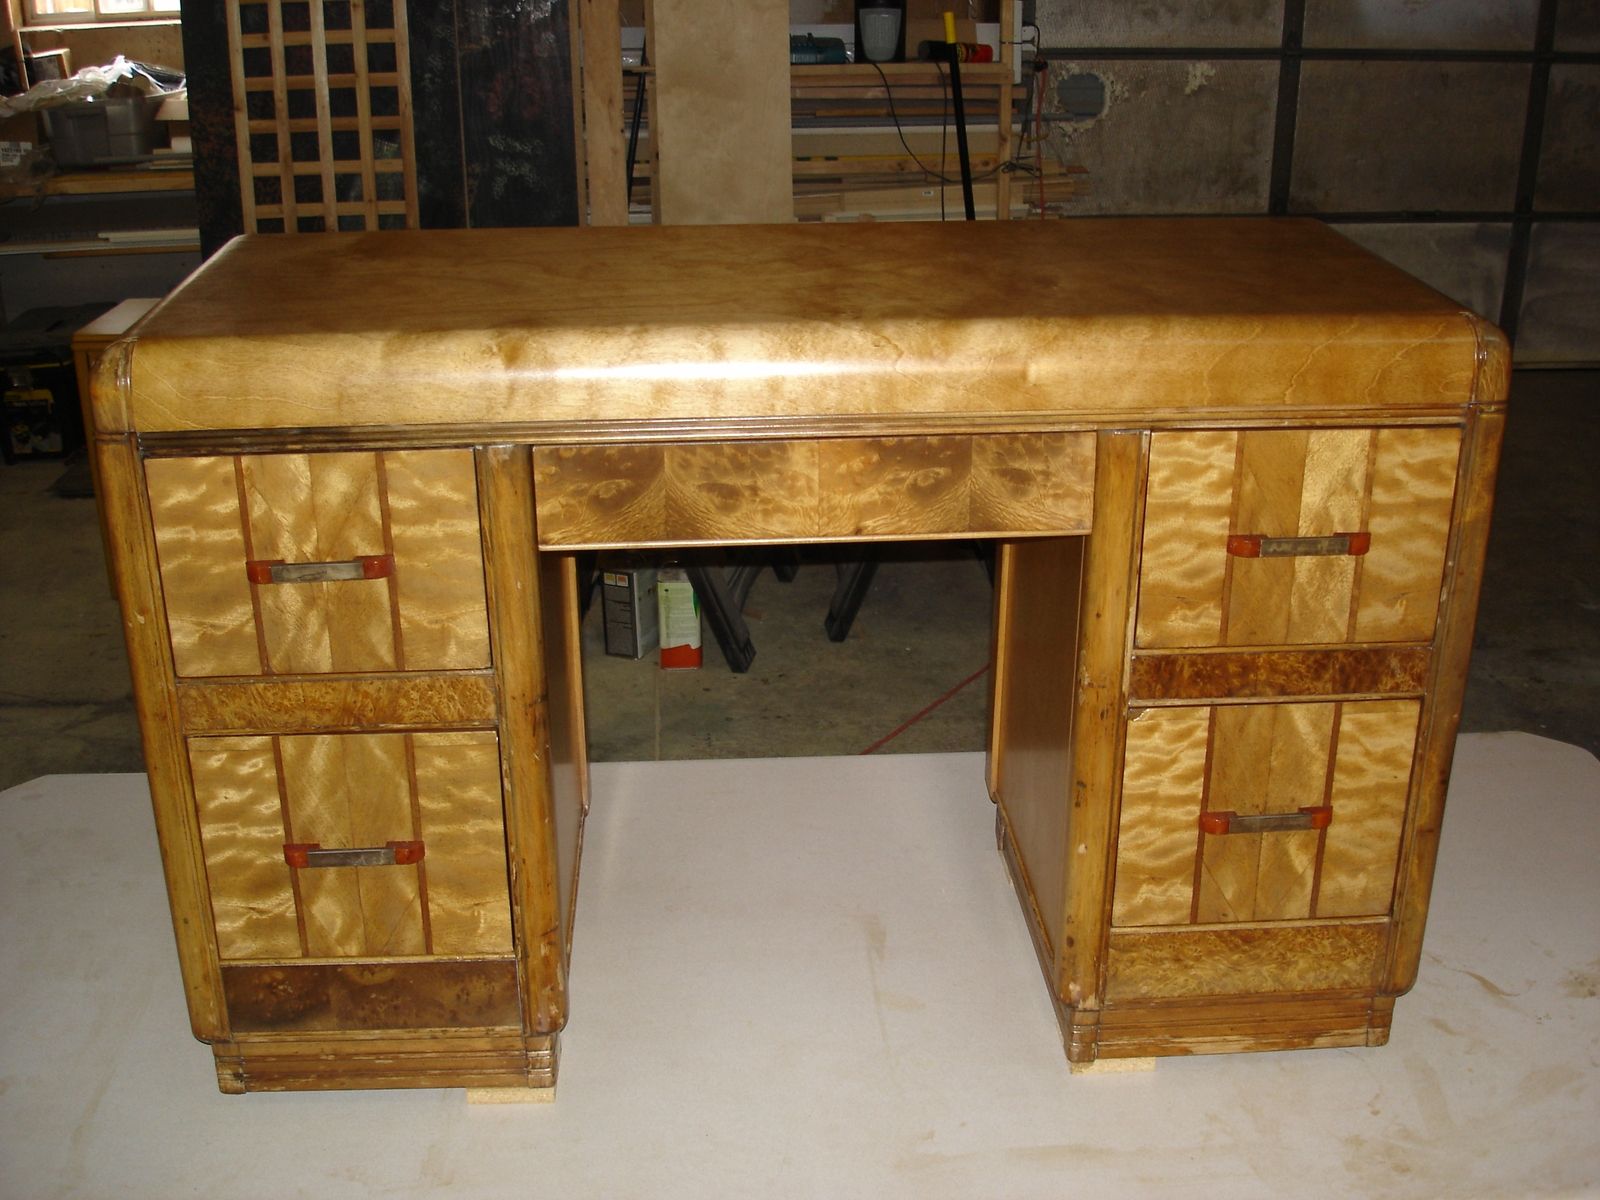 Hand Crafted Antique Desk Refinish By Mc Lowe Finish Carpentry